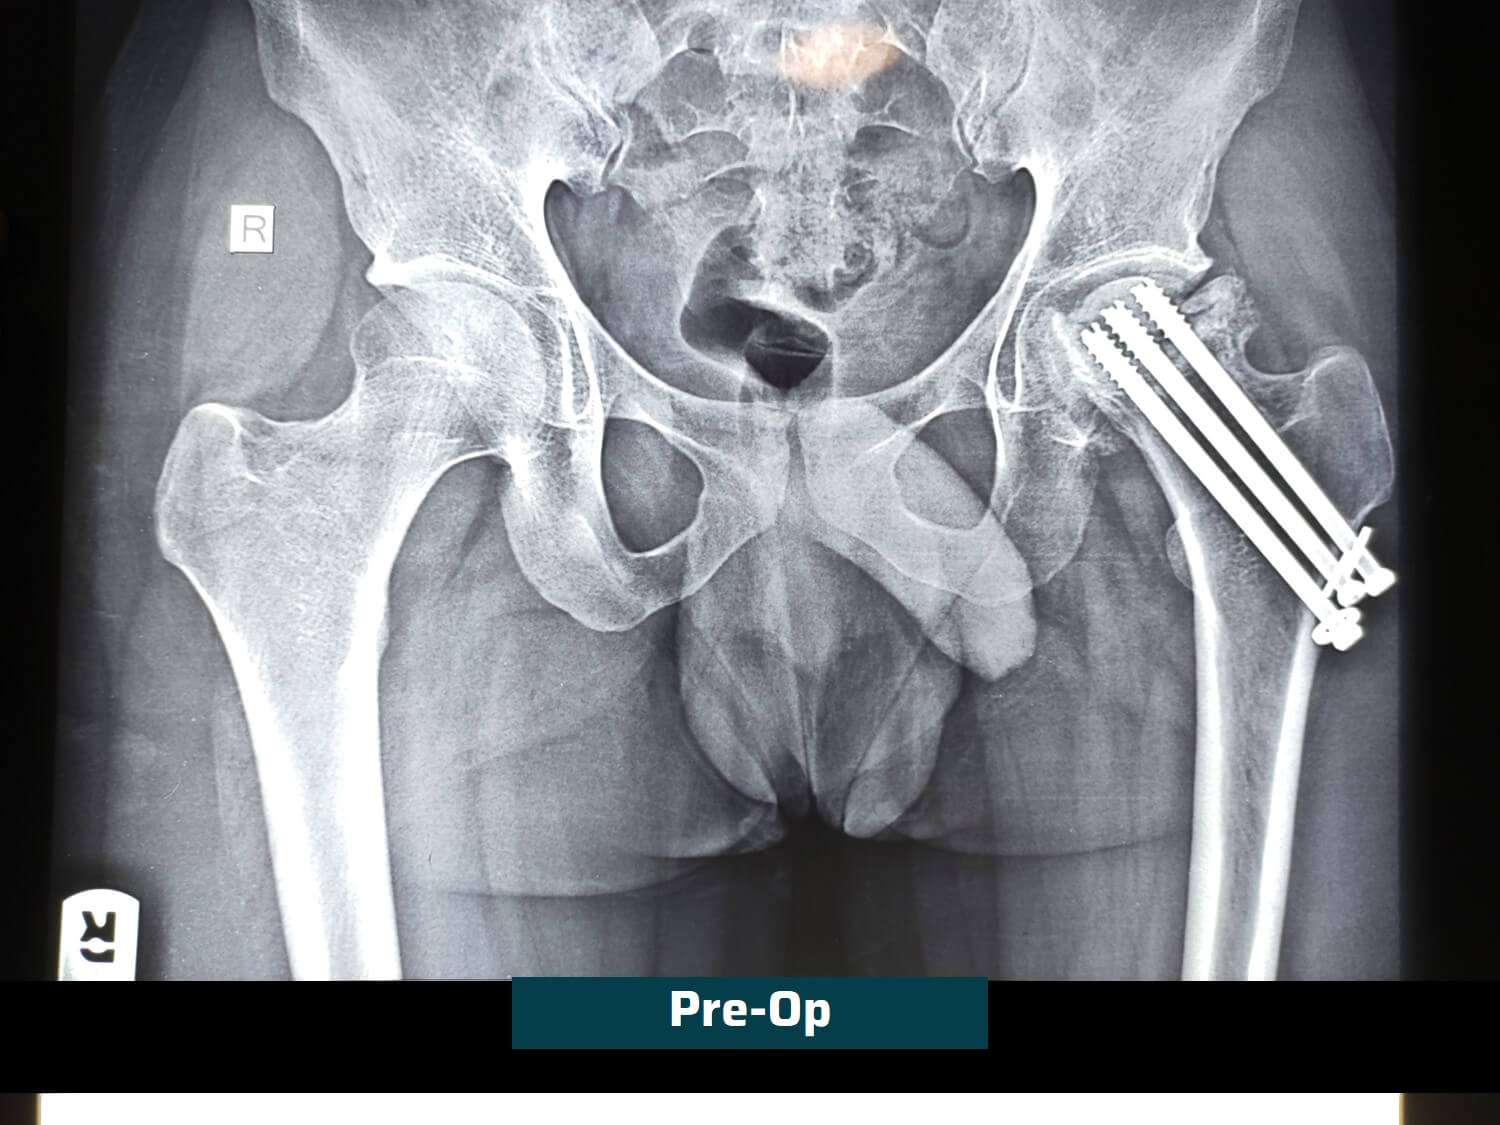 Primary Hip Replacement Surgery Ahmedabad